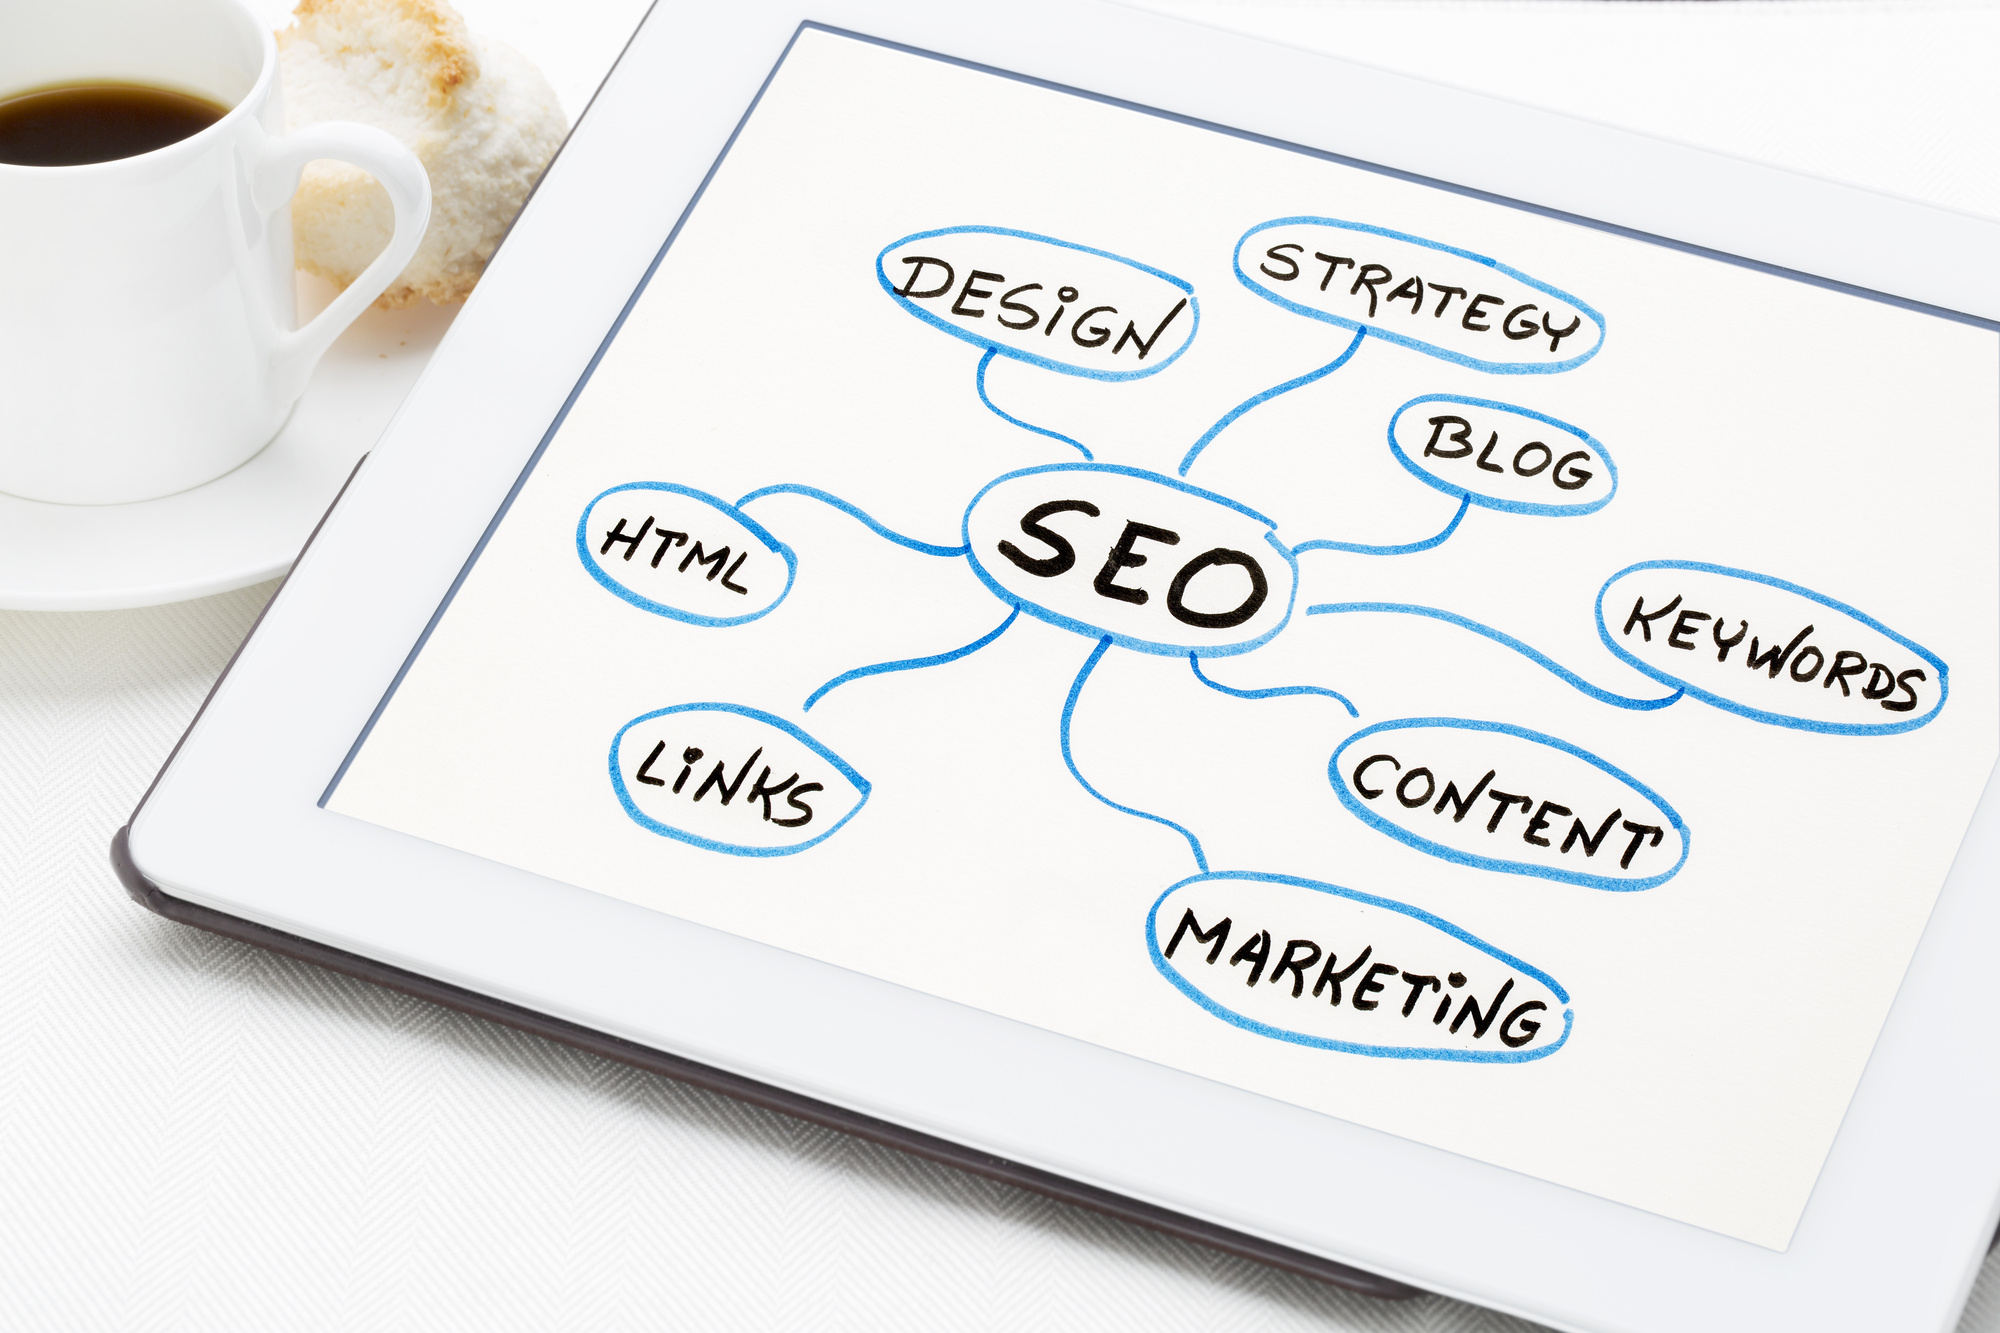 search engine optimization for dummies